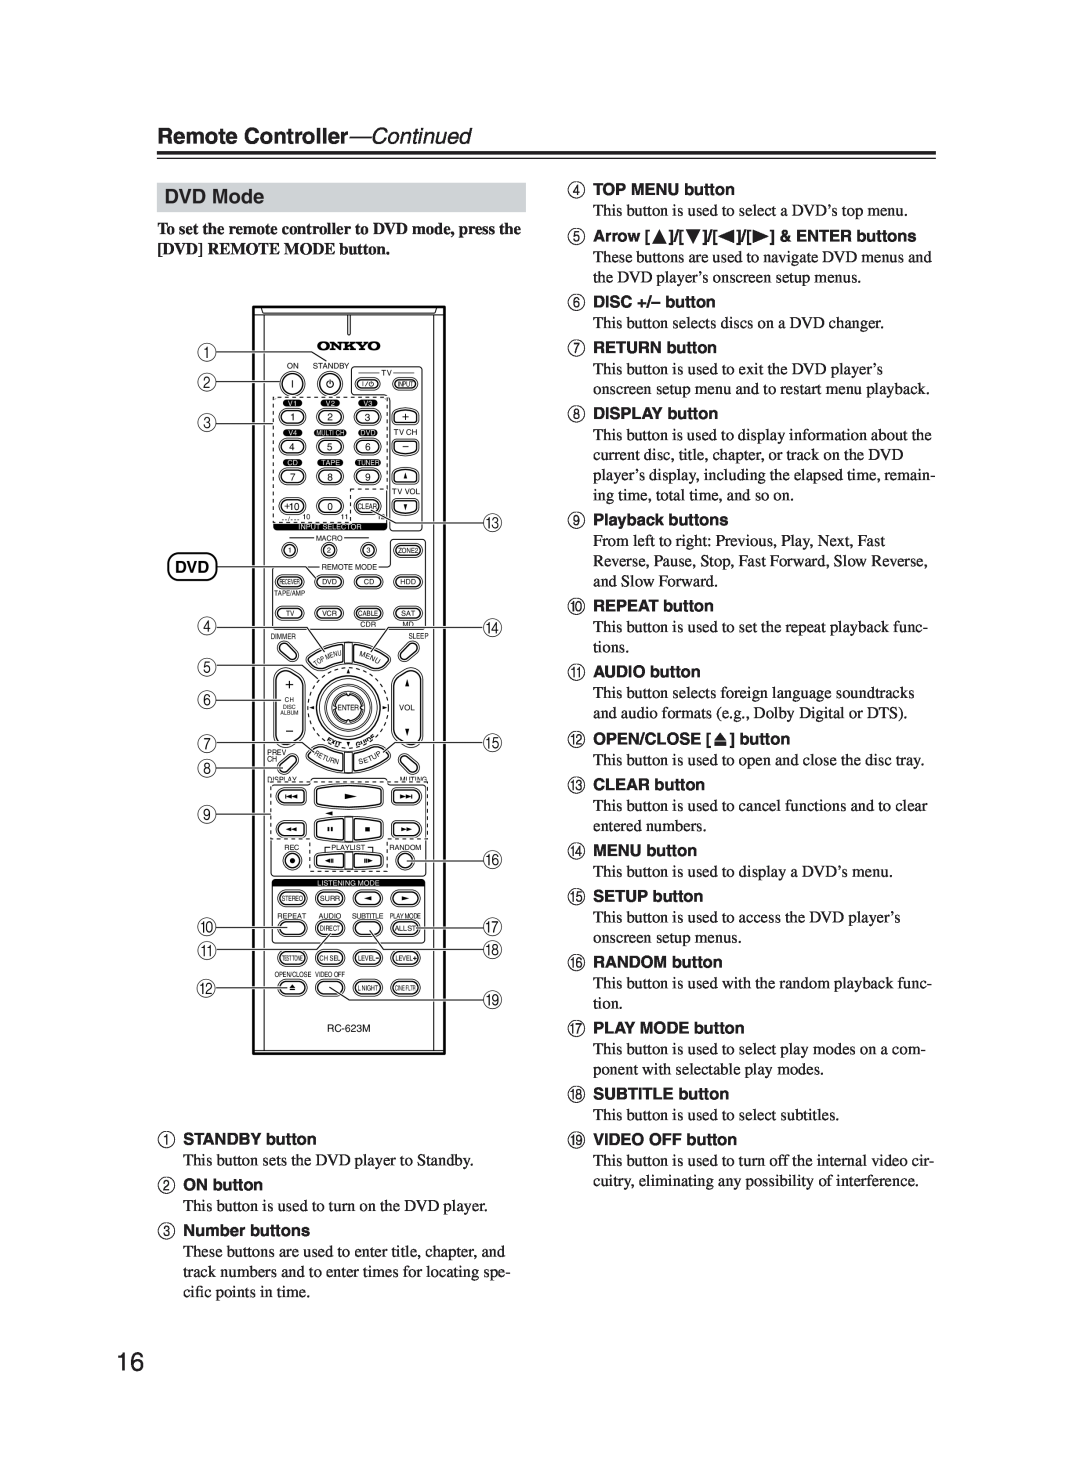 Onkyo TX-SR603X instruction manual DVD Mode, Remote Controller—Continued 